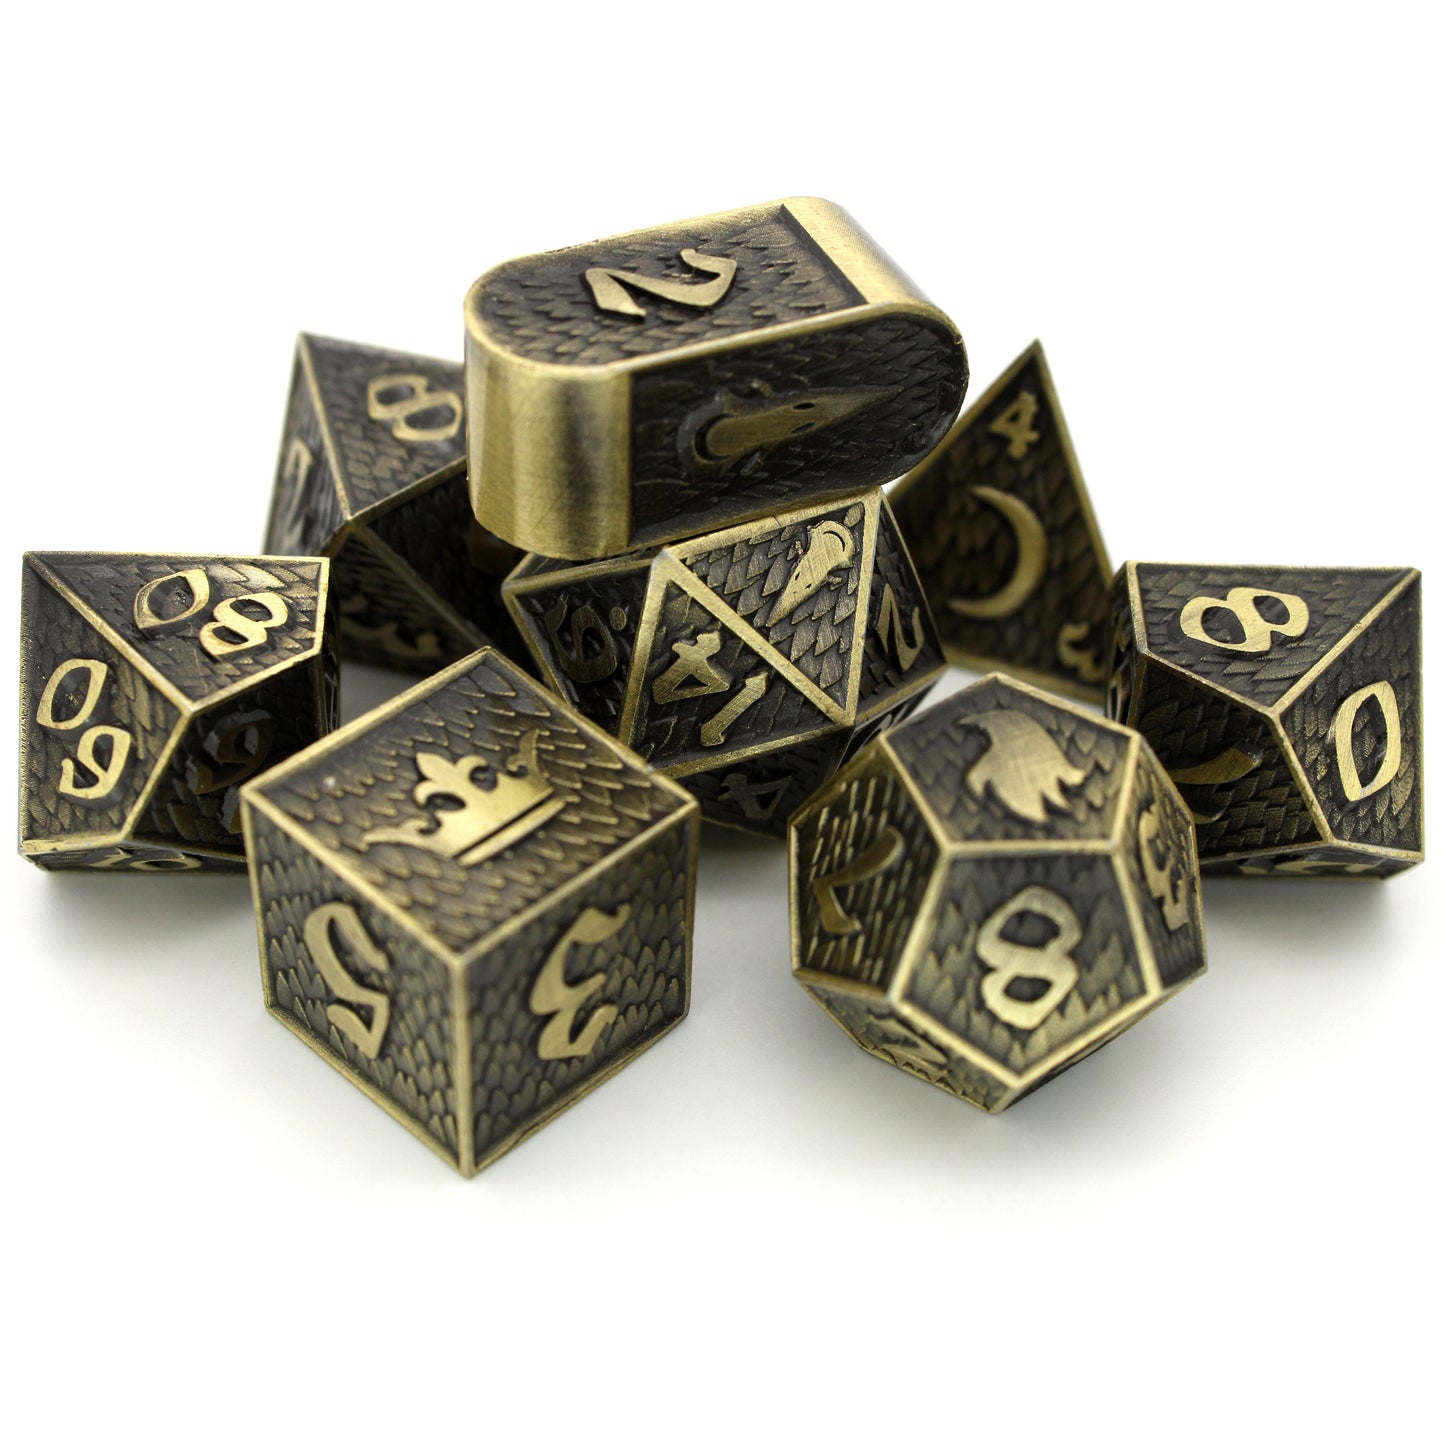 Champion is an 8-piece Dice Envy exclusive set of bronze metal dice in our Raven Queen mold.